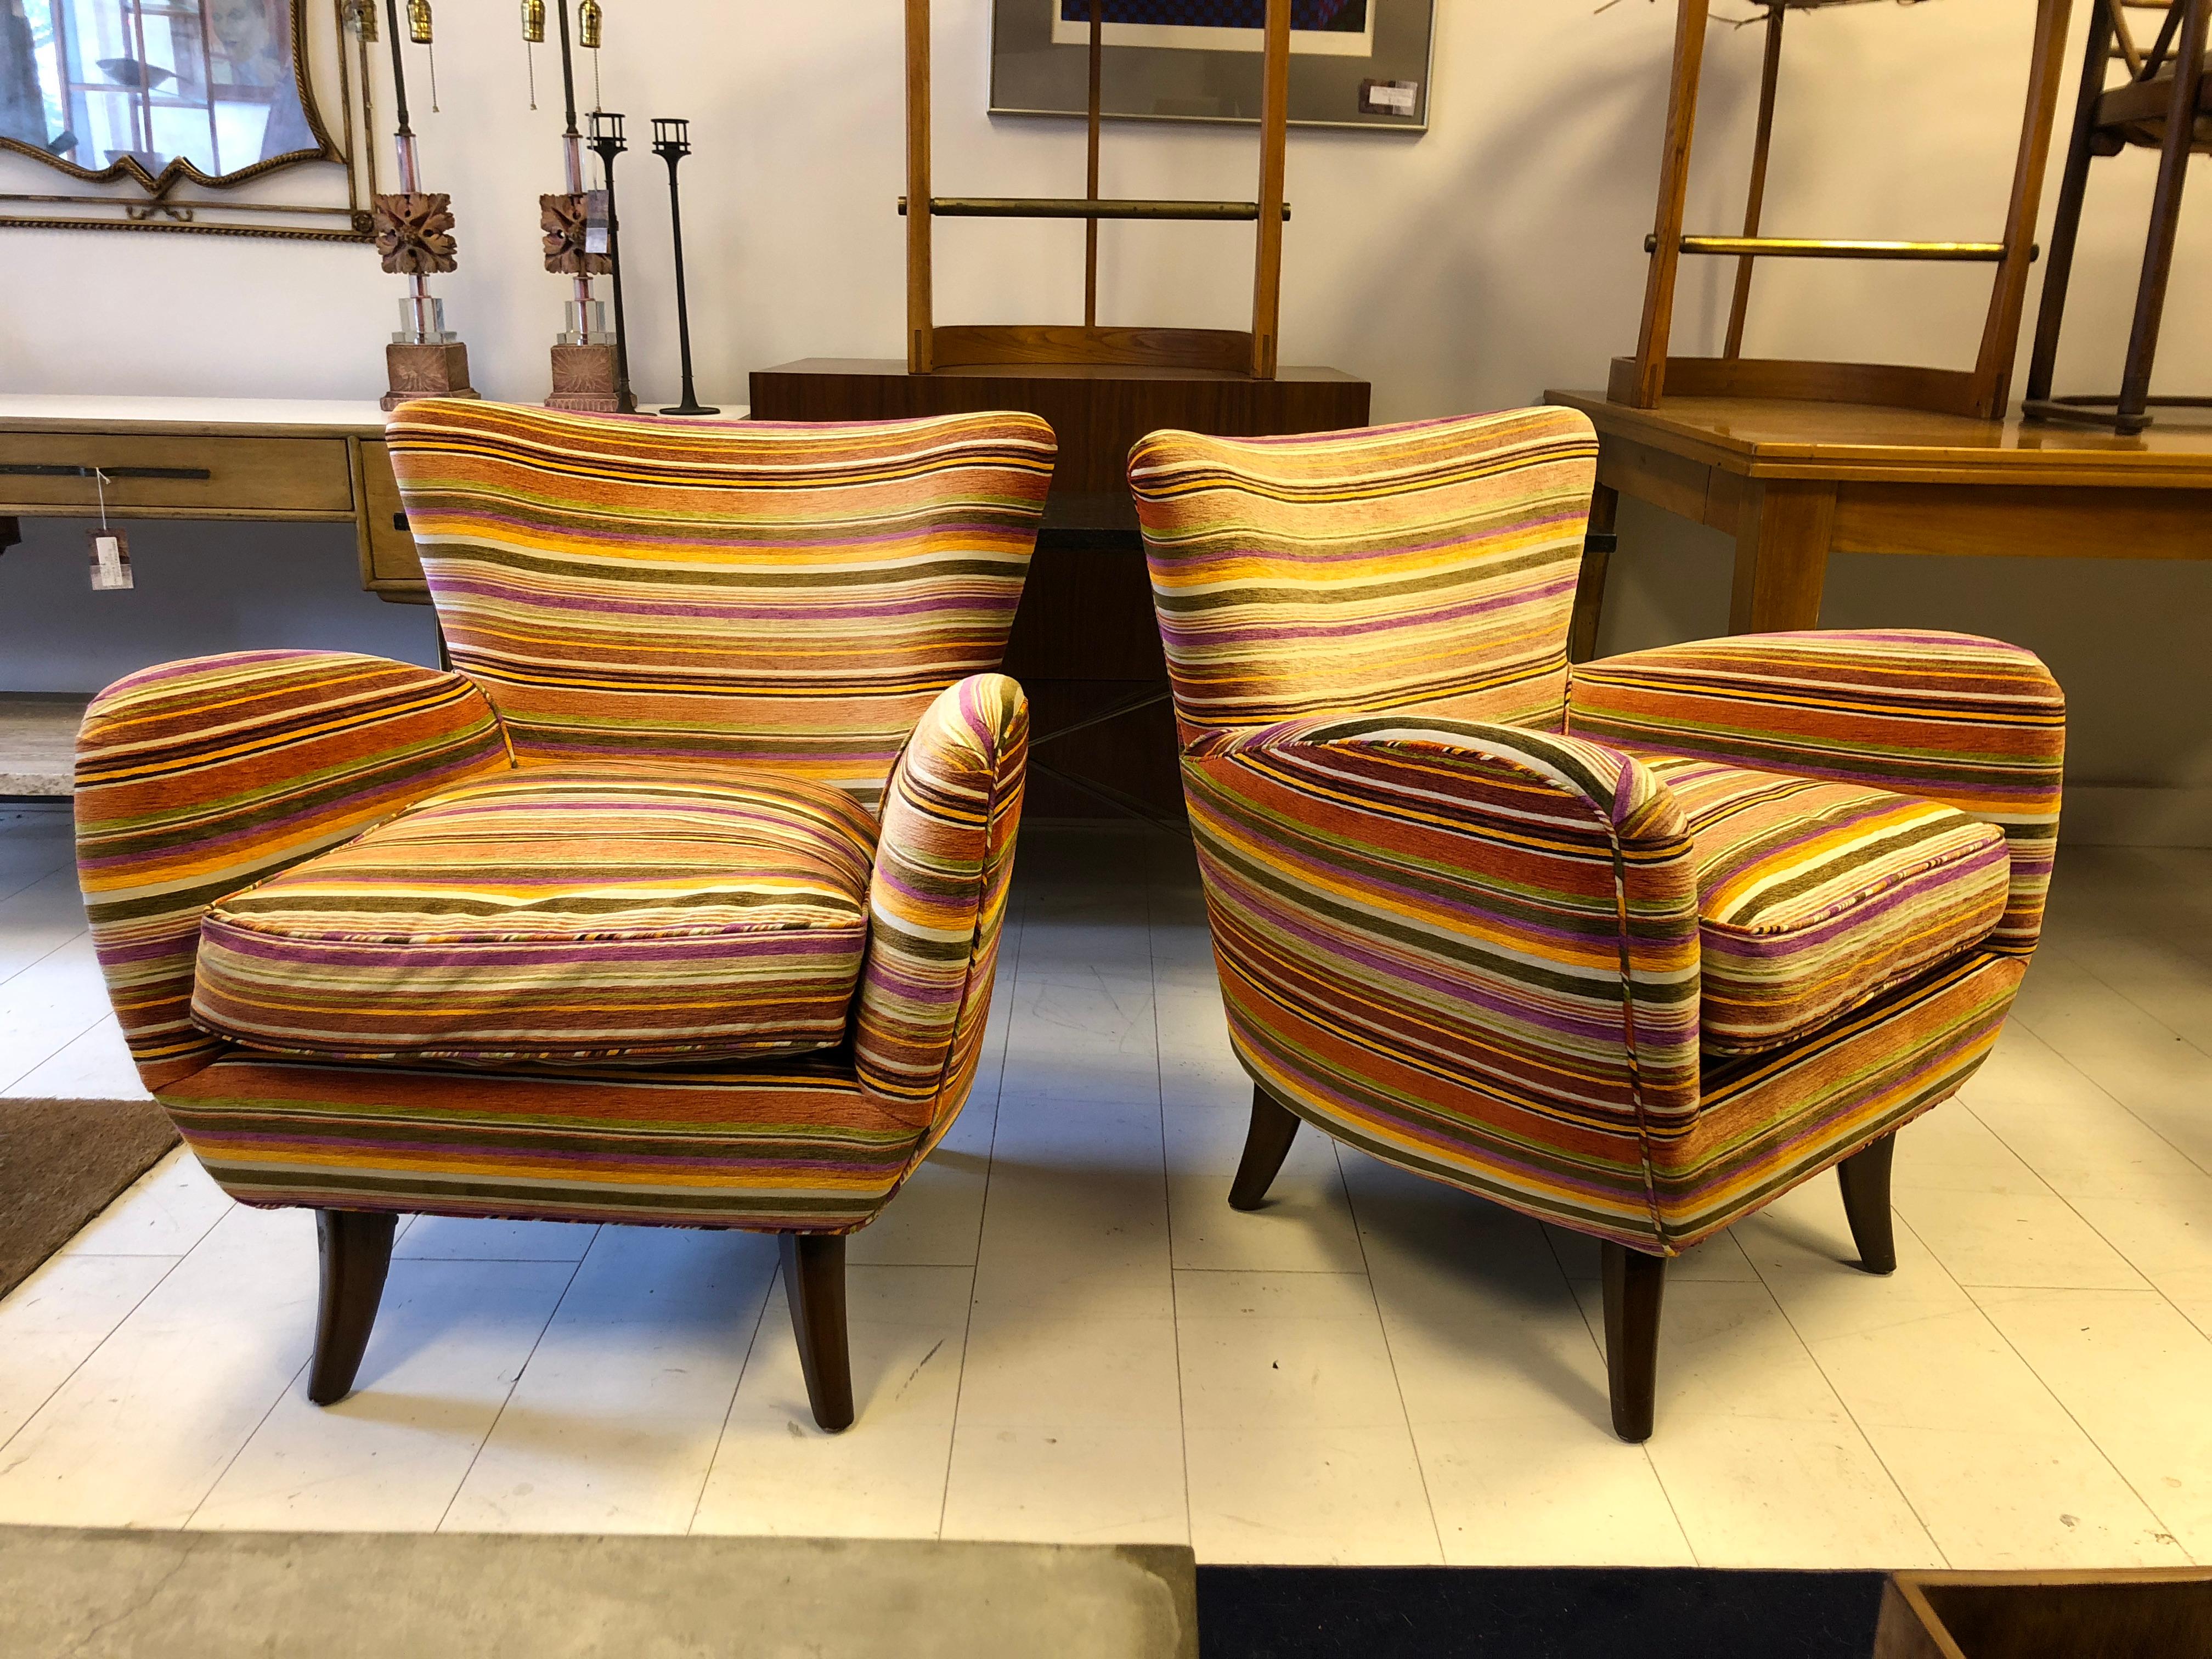 Classic Schwadron lounge chairs with carved walnut legs in a vintage striped cotton velvet.